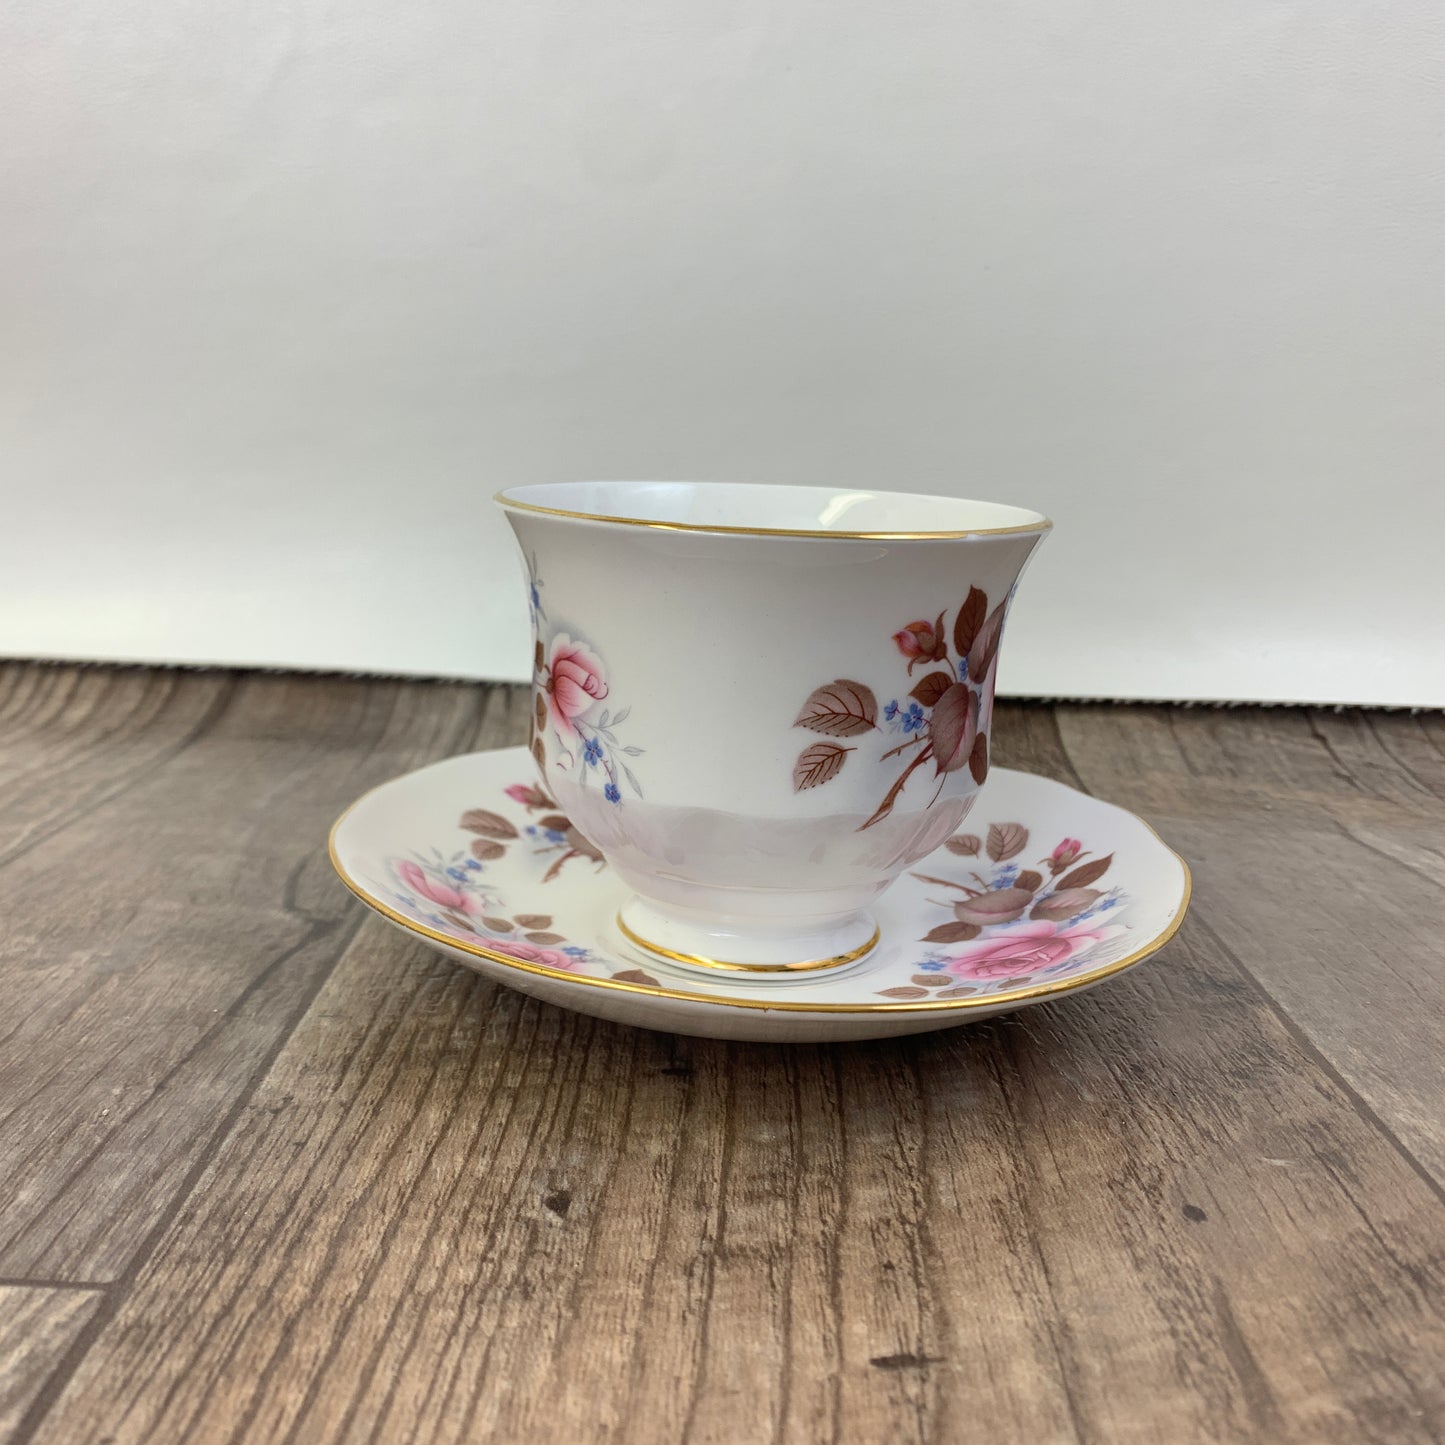 Pink and Blue Floral Teacup, Queen Anne Vintage Tea Cup and Saucer Set